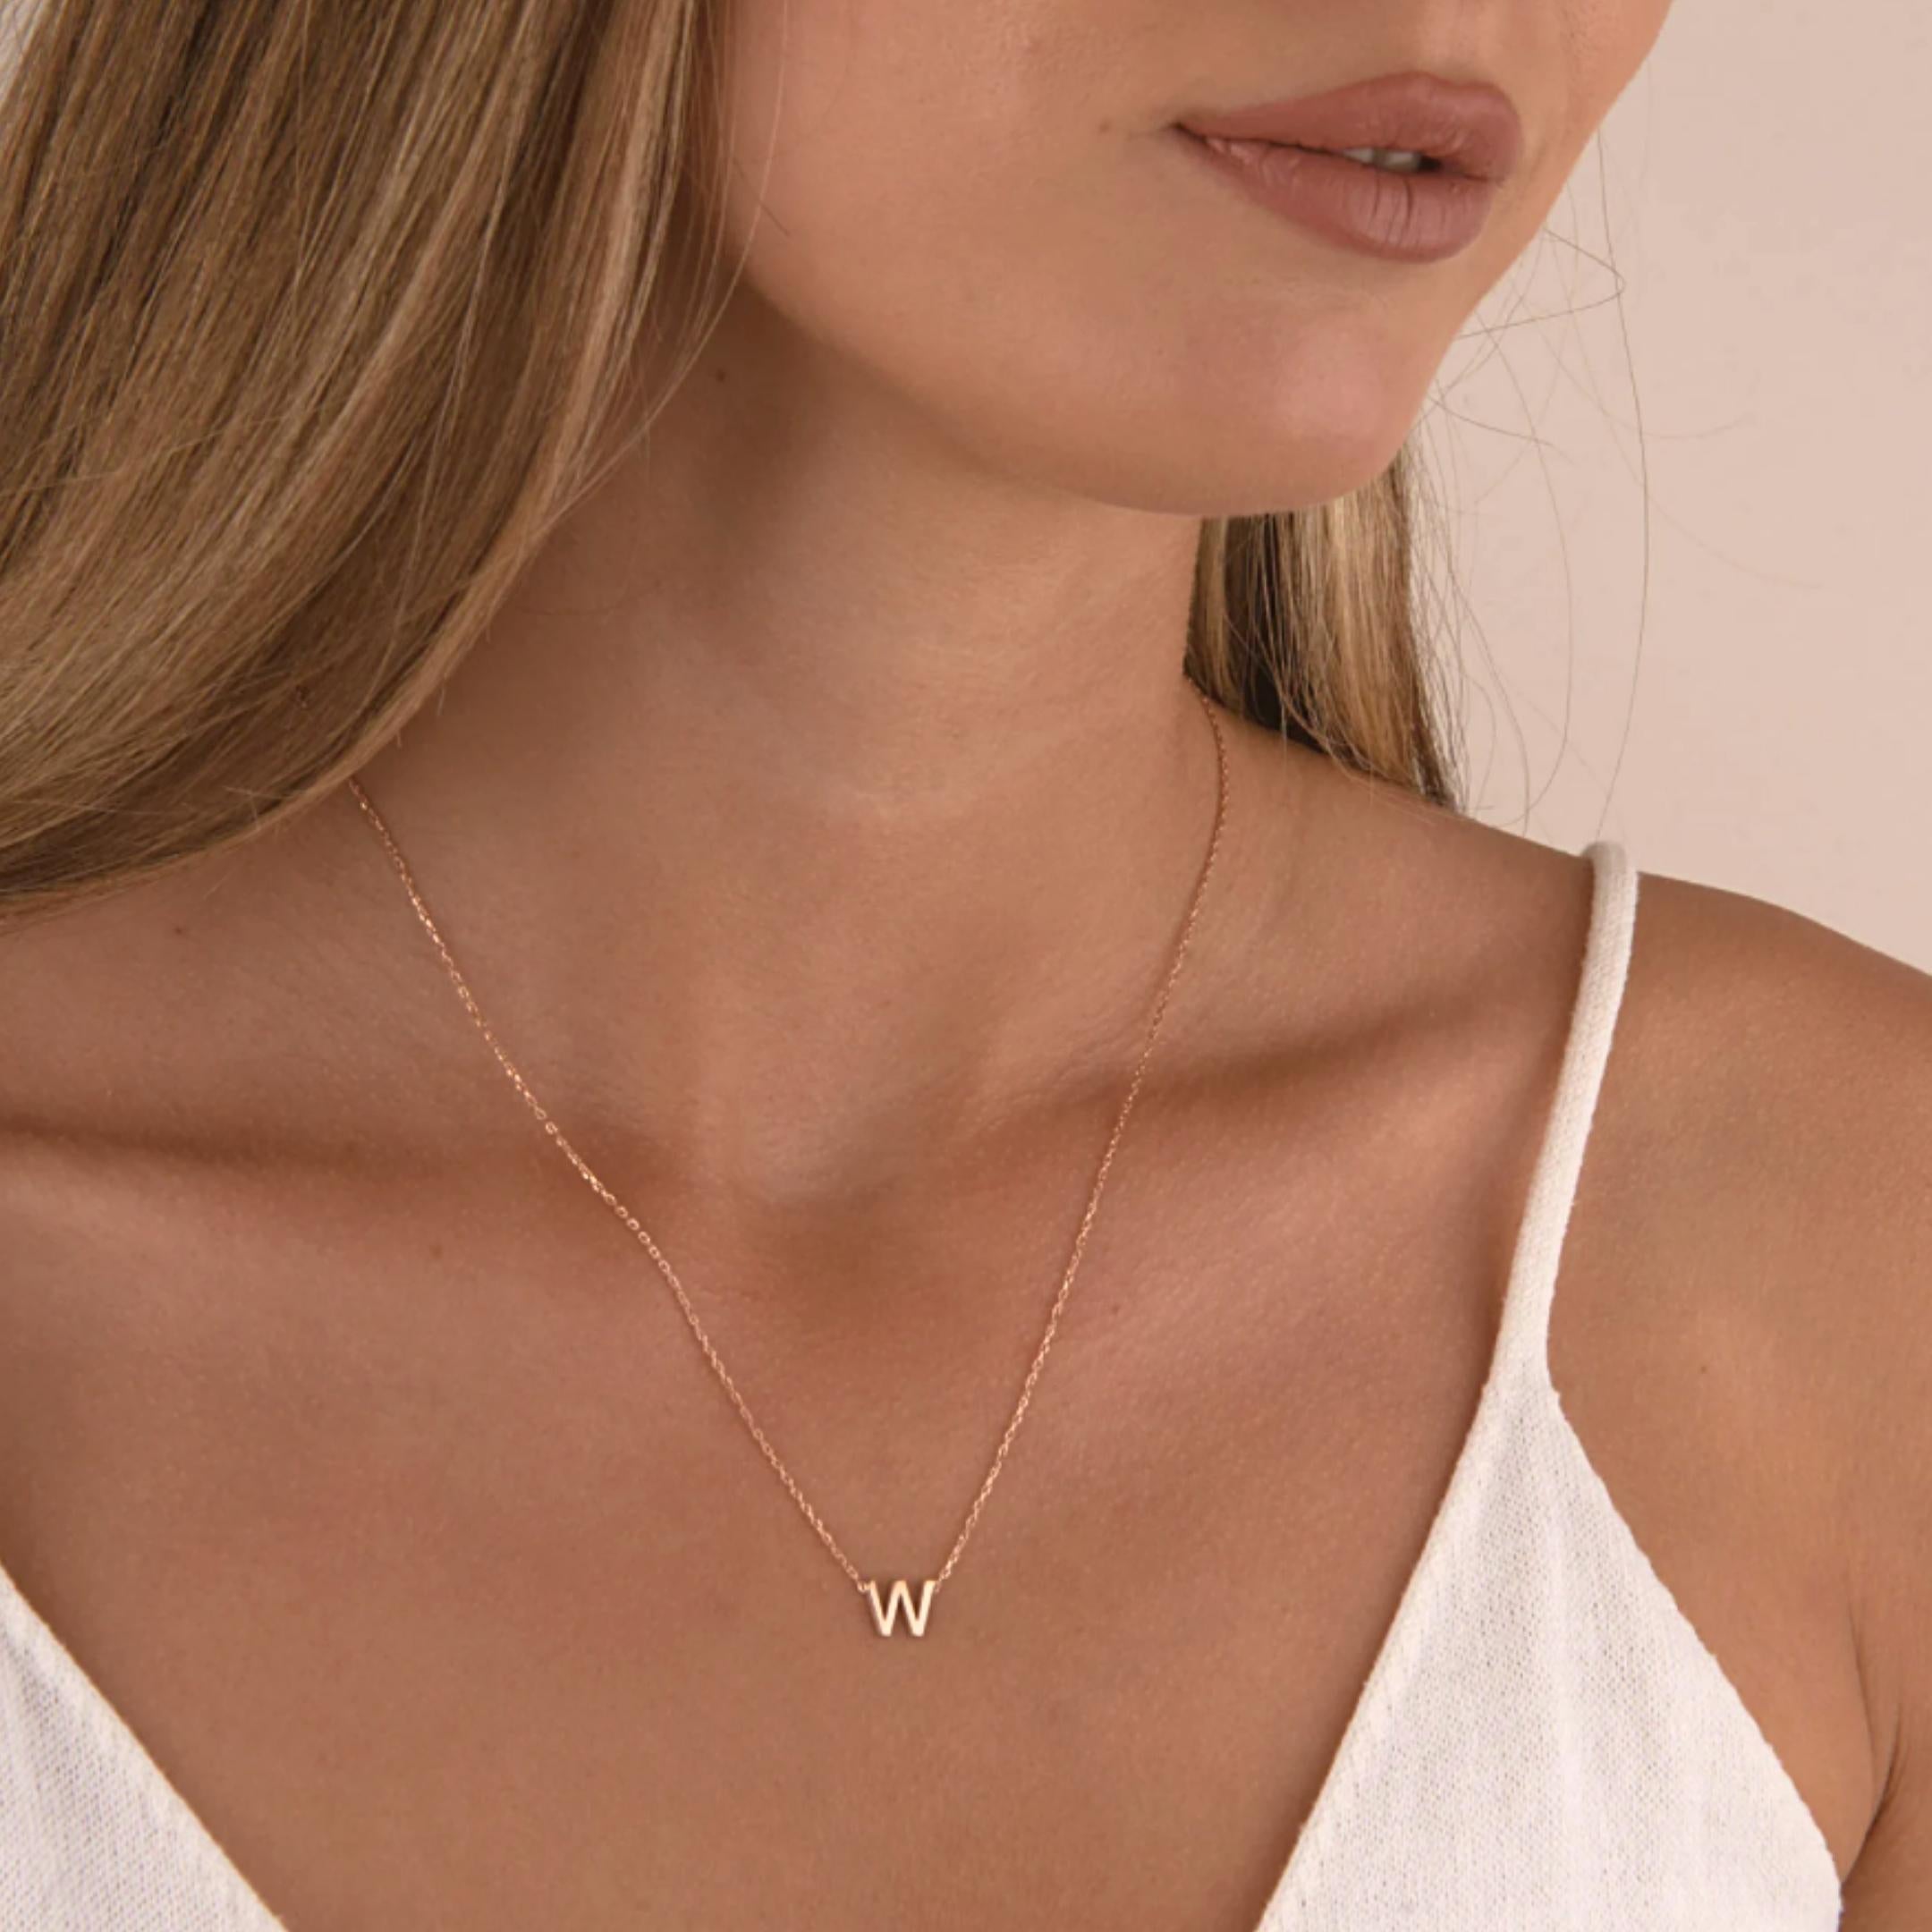 The Original Single Initial Letter Necklace